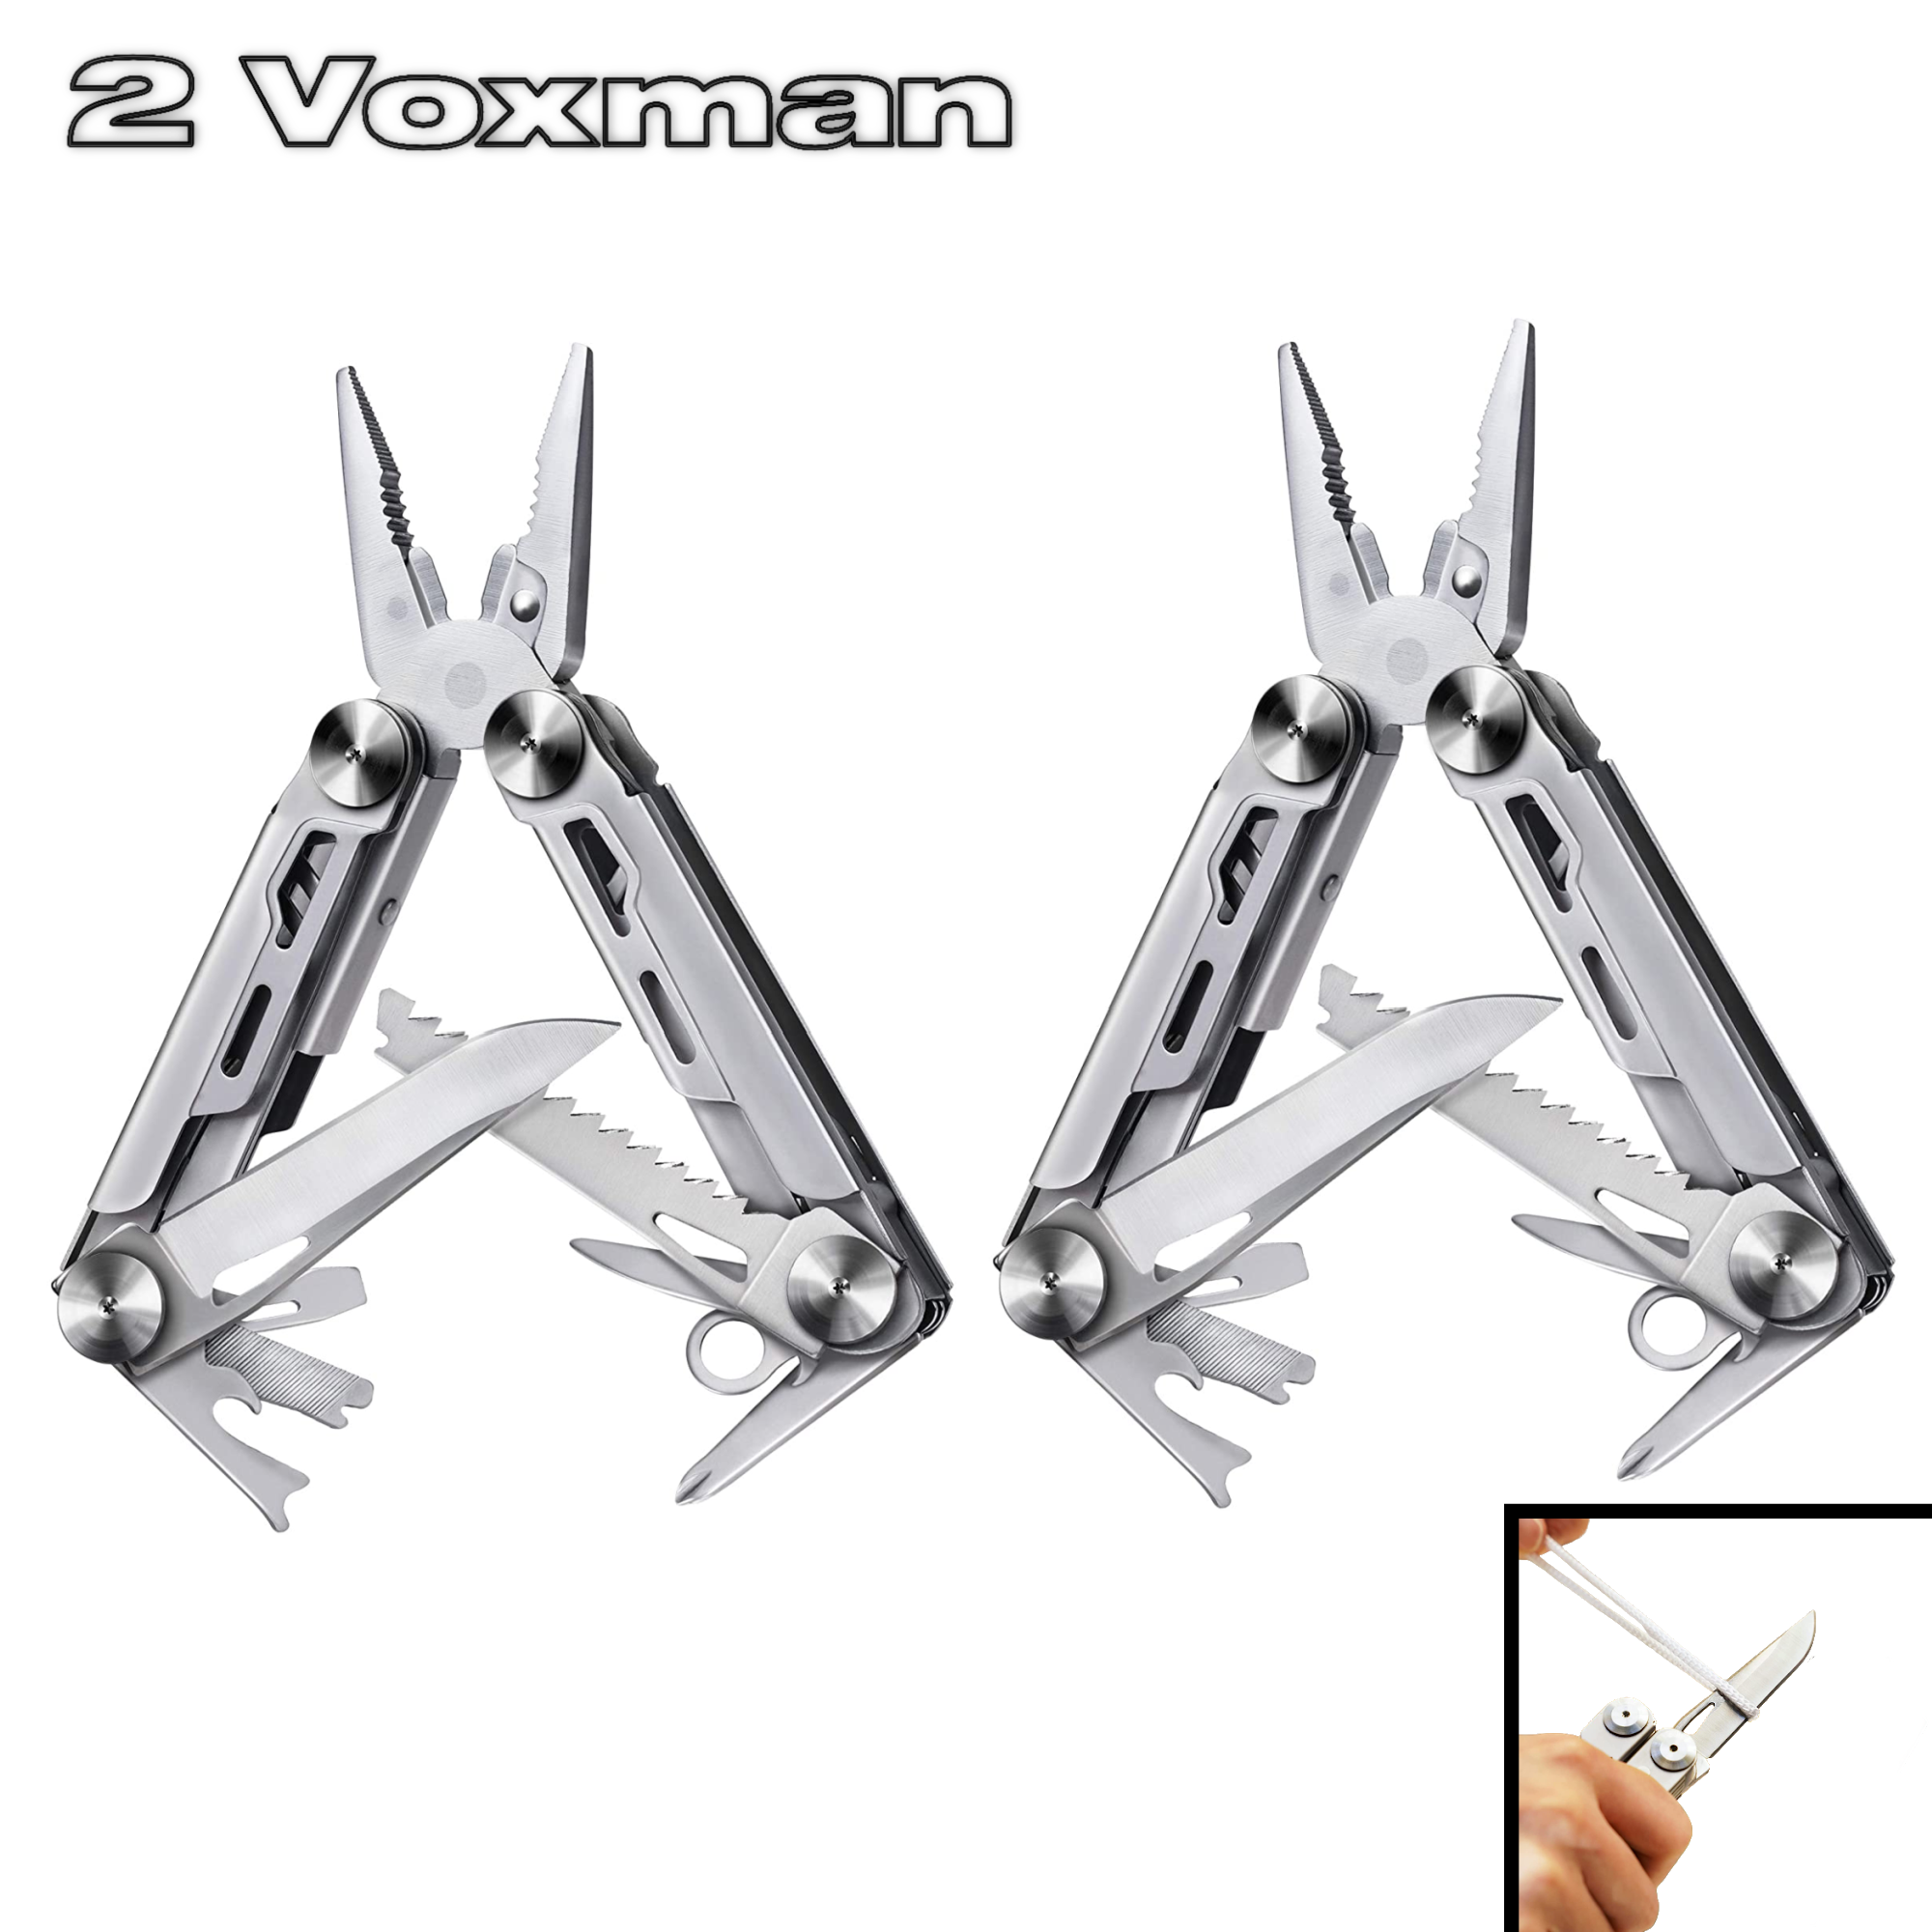 2 Voxman - Pocket Multitool Knife With Pliers 12 in 1 EDC Gear